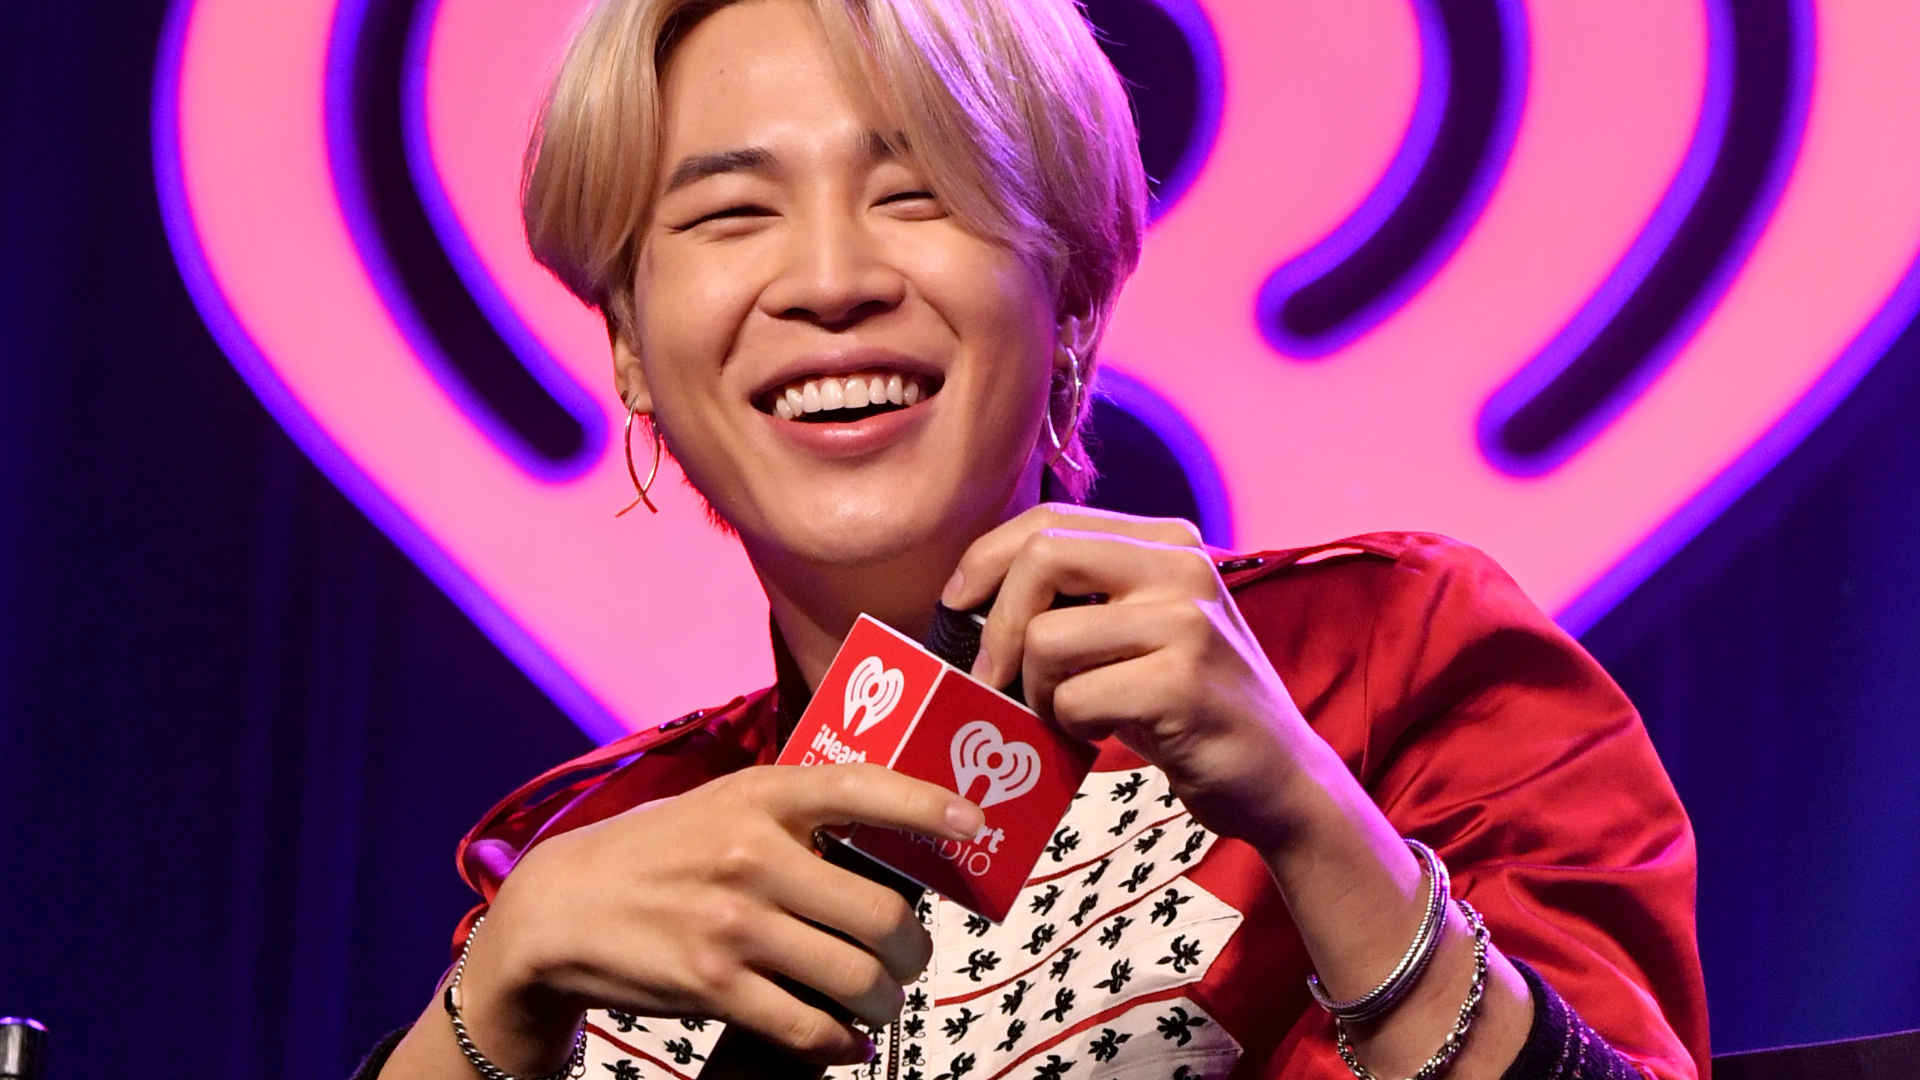 Jimin of "BTS" onstage at iHeartRadio LIVE with BTS presented by HOT TOPIC at iHeartRadio Theater on January 27, 2020 in Burbank, California. 